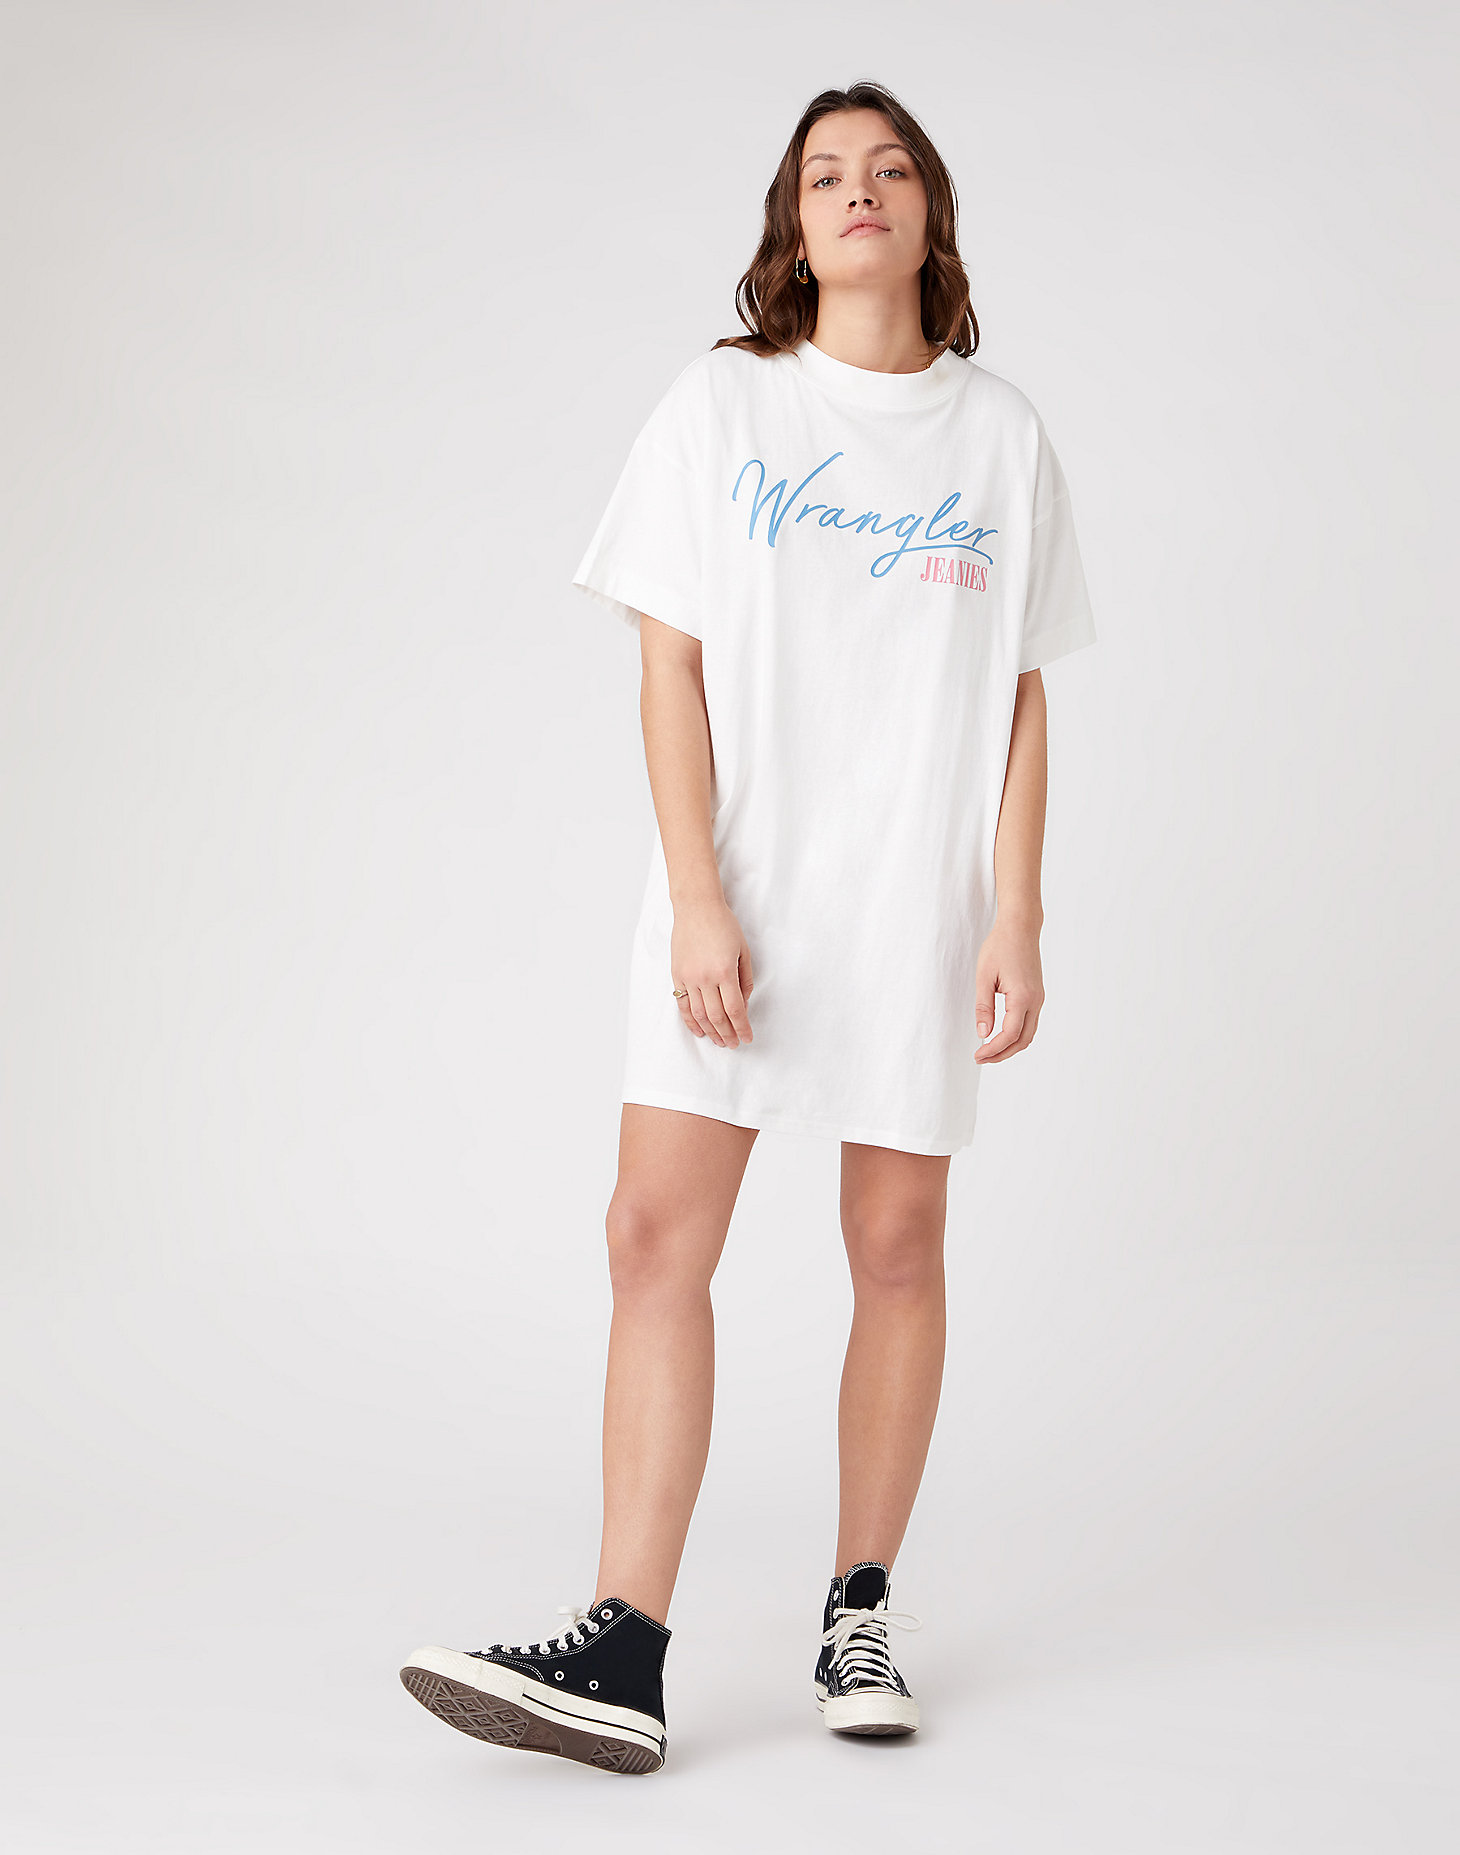 Tee Dress in Off White alternative view 1